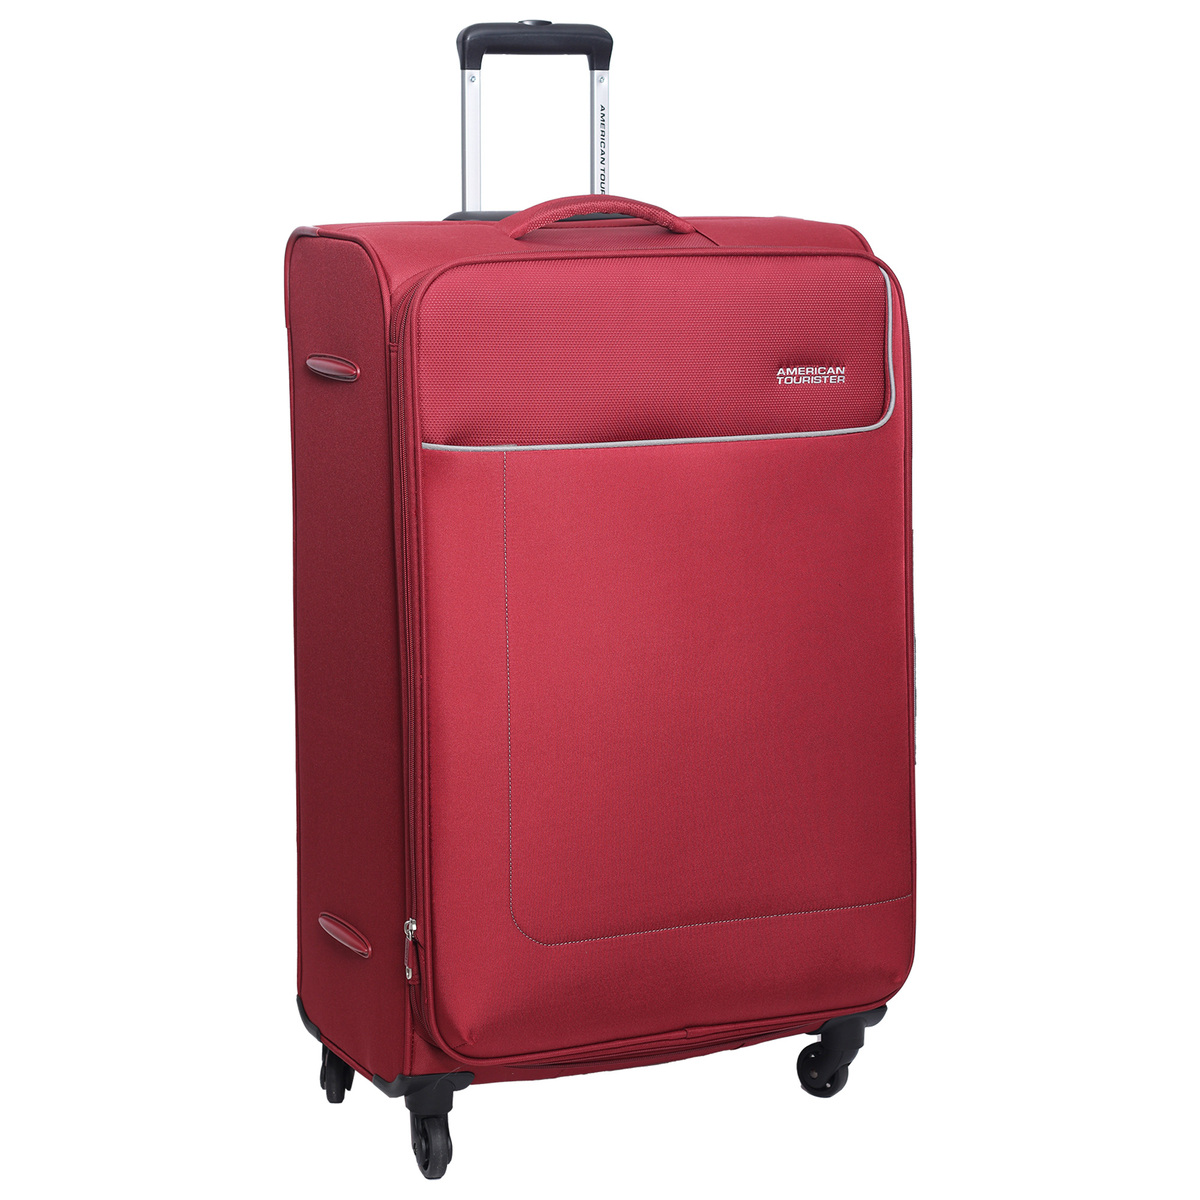 American Tourister Jamaica Polyester 4 Wheel Soft Trolly, 80 cm, Maroon